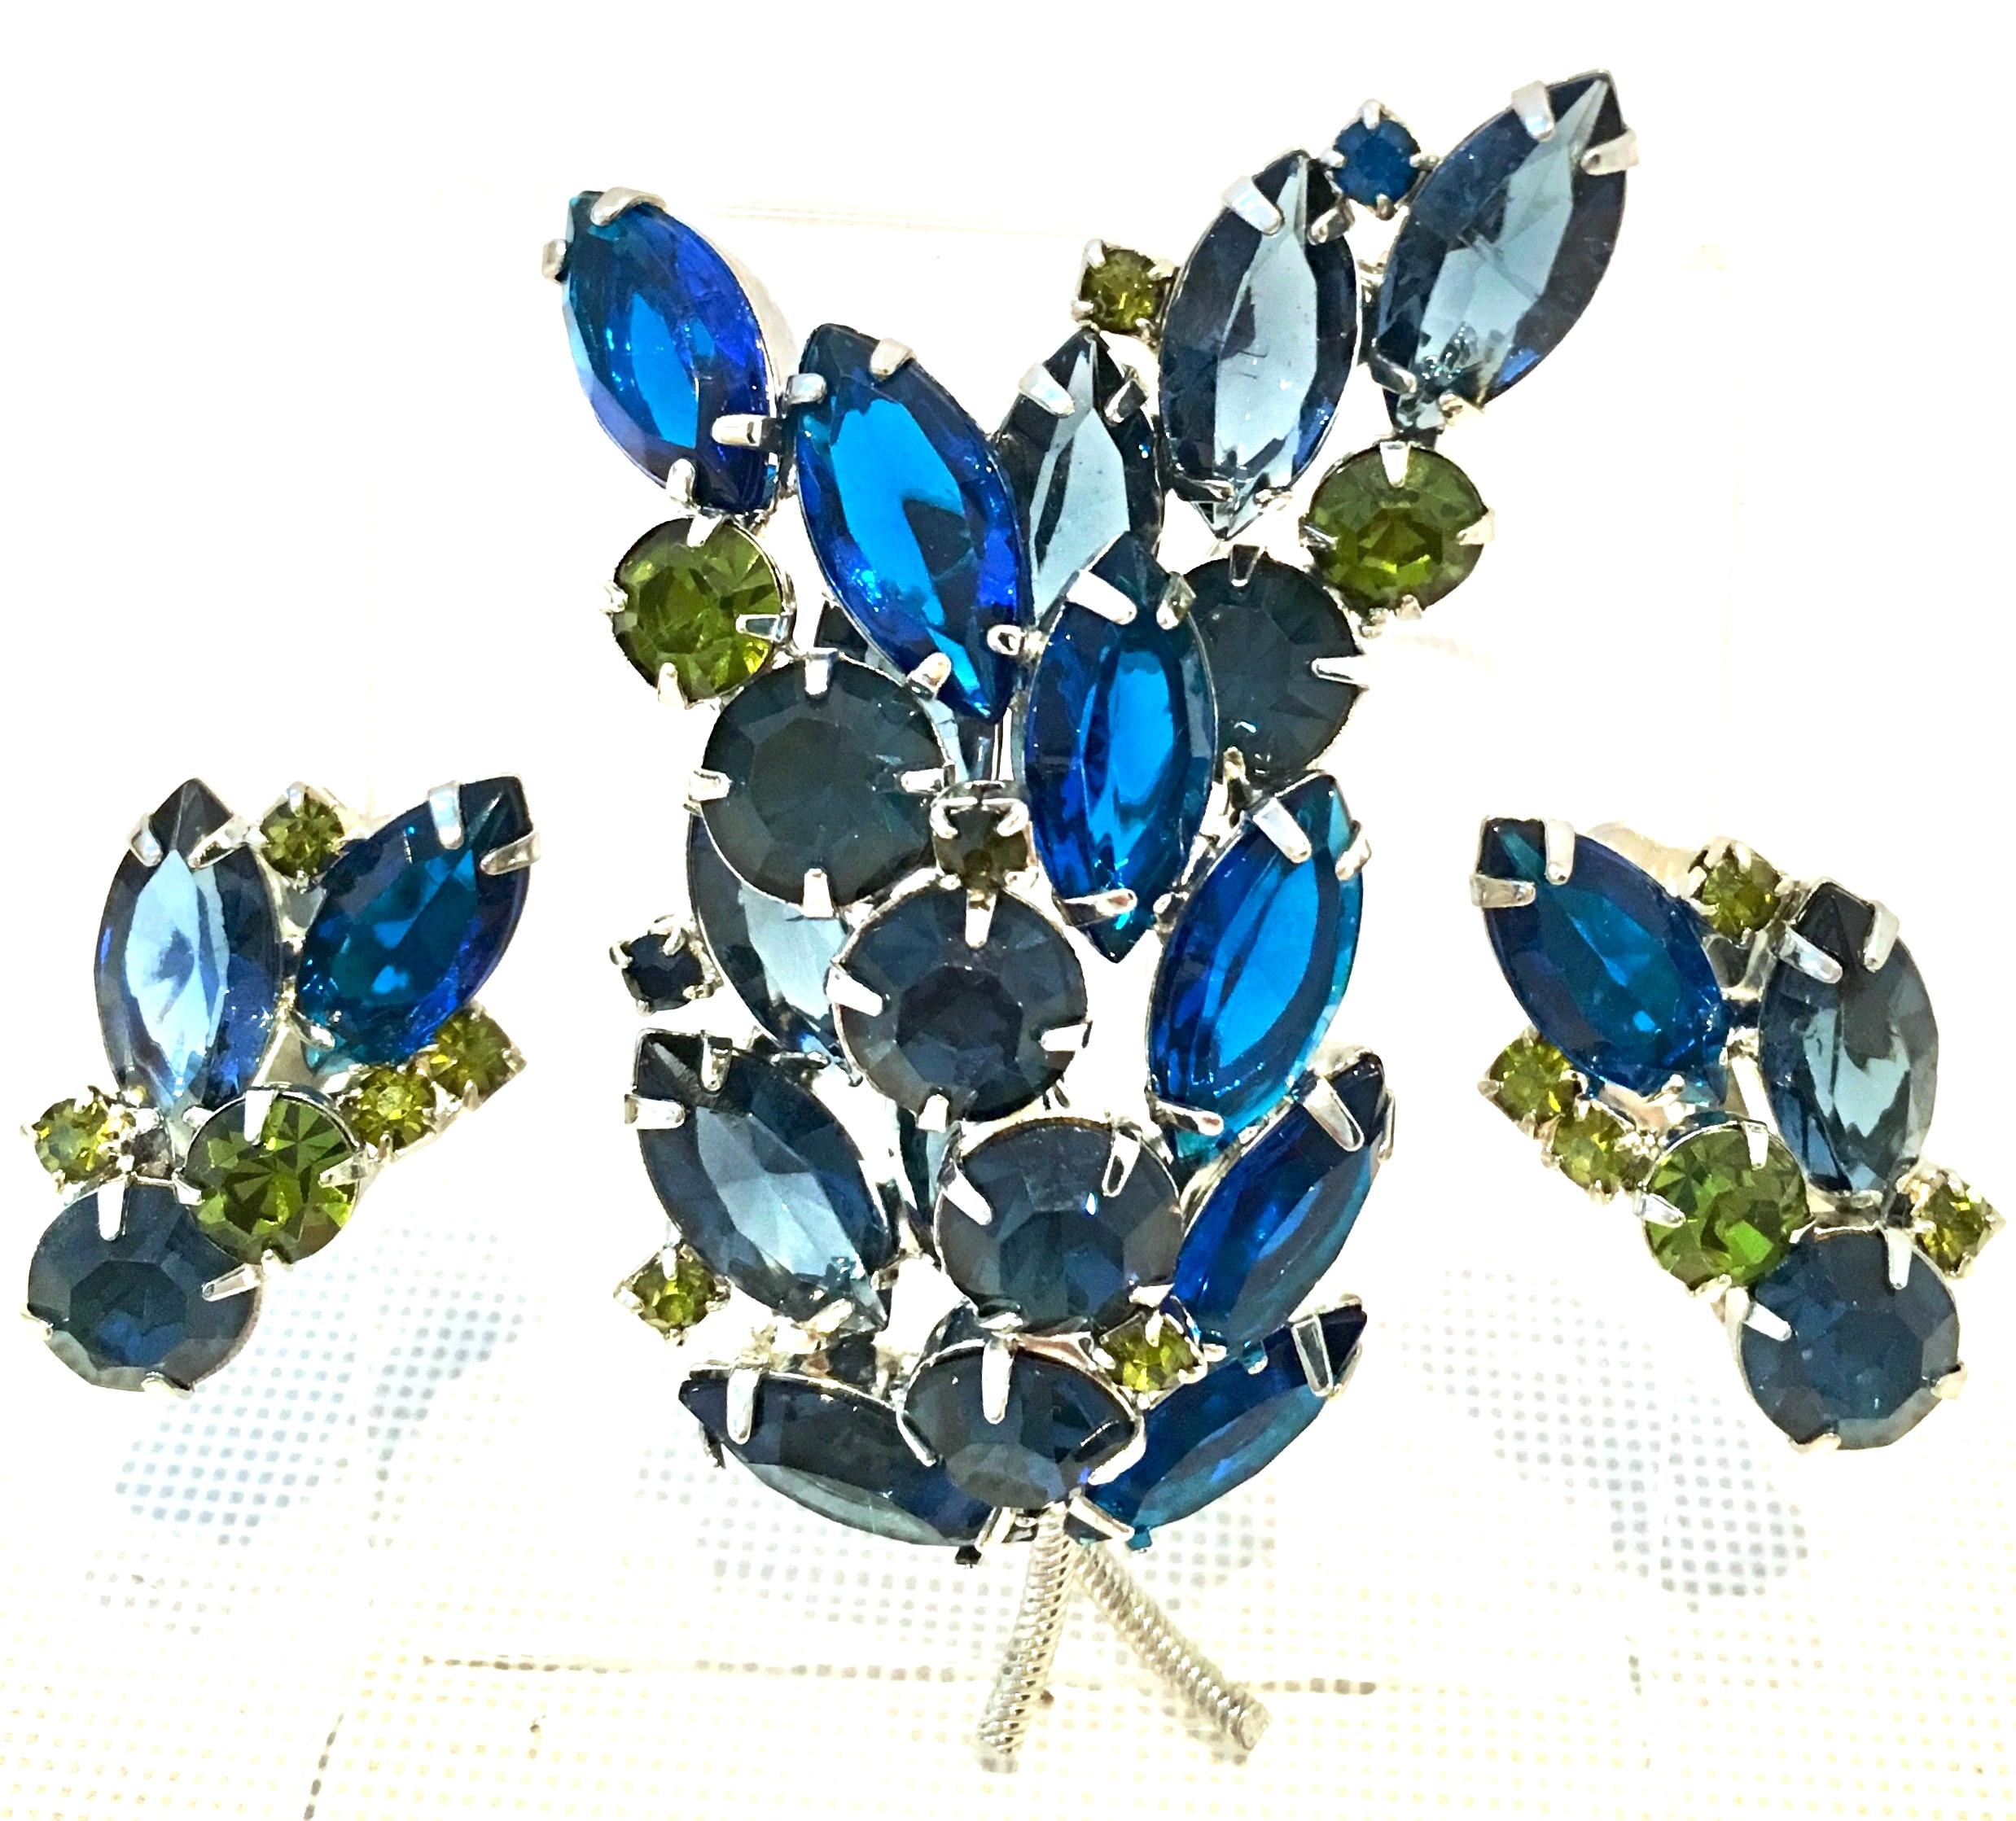 1960'S Silver & Austrian Crystal Dimensional Abstract Floral Brooch and Clip Style Earrings, Set of Three Pieces. This finely crafted three piece set features a large dimensional silver rhodium plate brooch with navette and round brilliant faceted